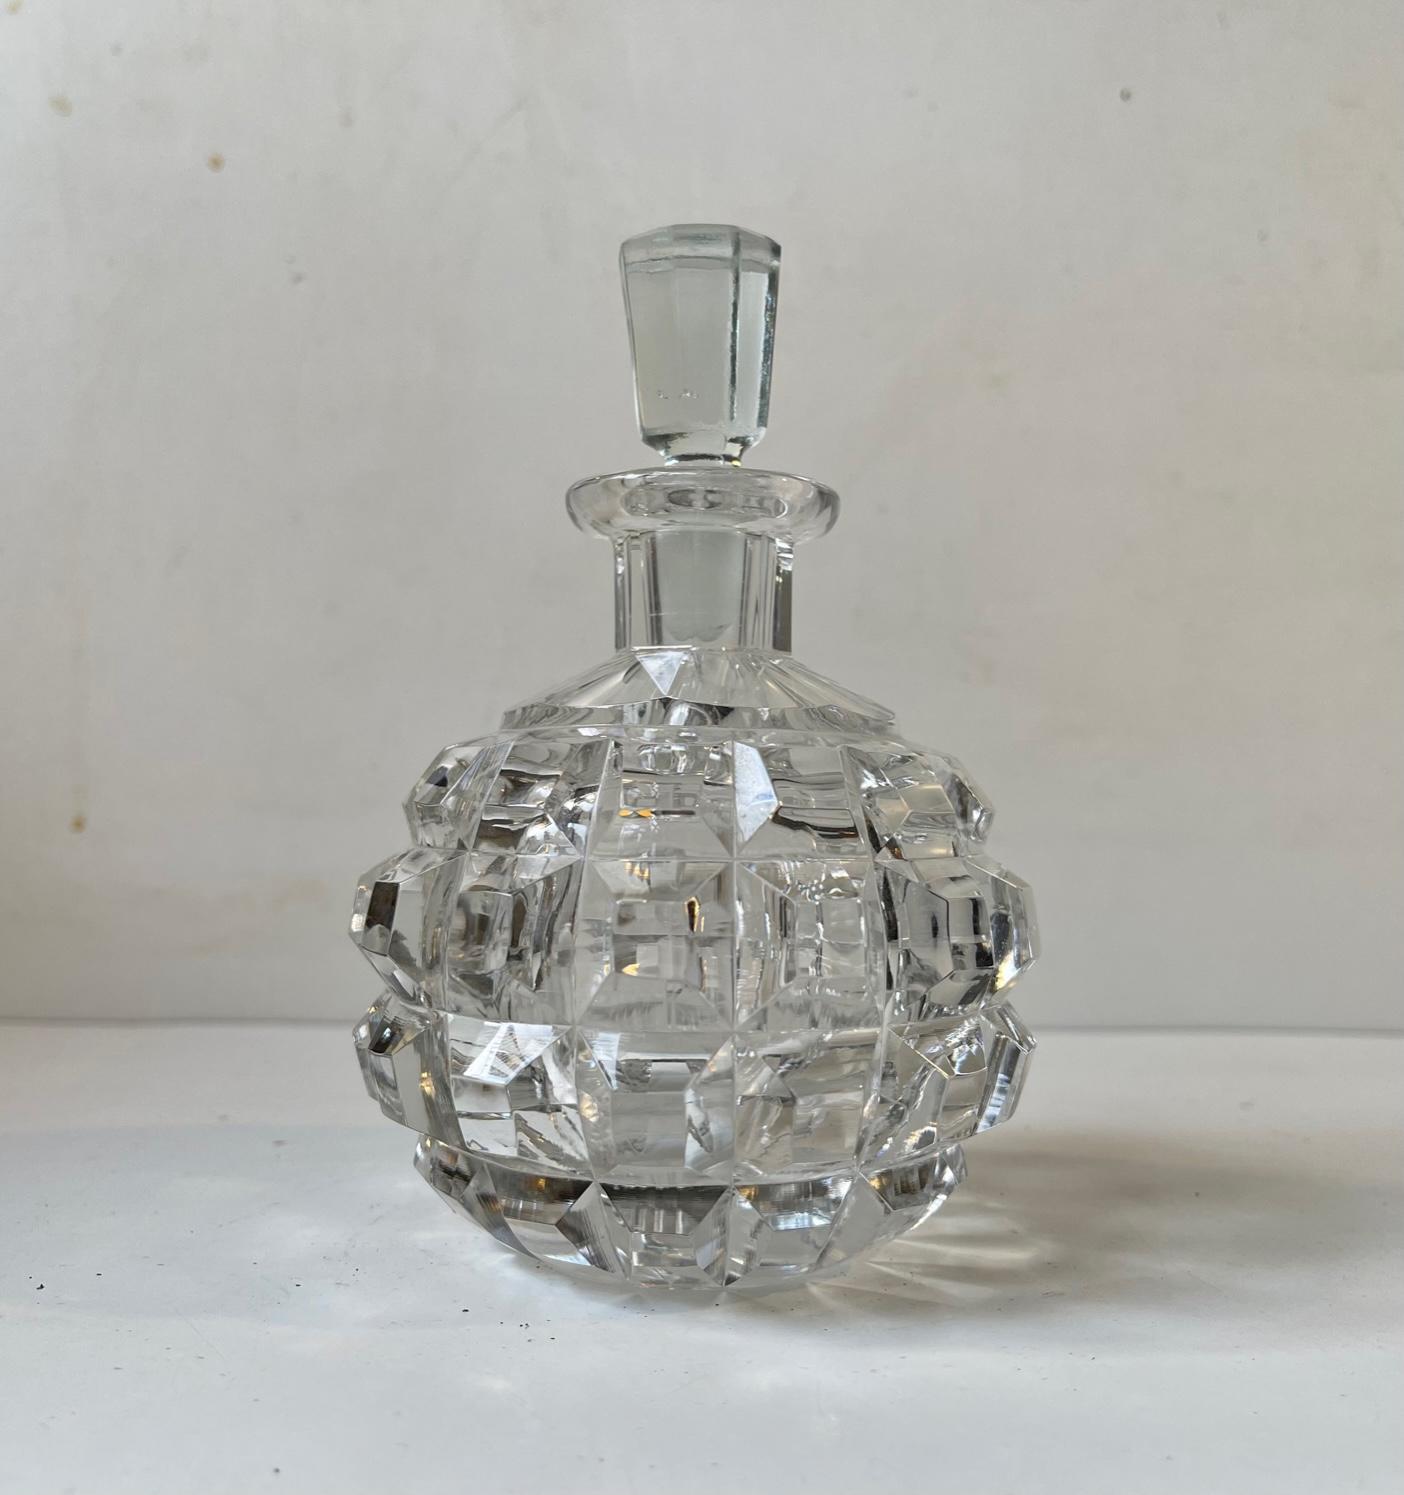 Small stylized round crystal decanter cut with cushion shaped patterns and set with a faceted stopper. Probably made by either Holmegaard or Lyngby in Denmark during the 1930s. Reminiscent in style to similar pieces from Baccarat and Daum. It has a